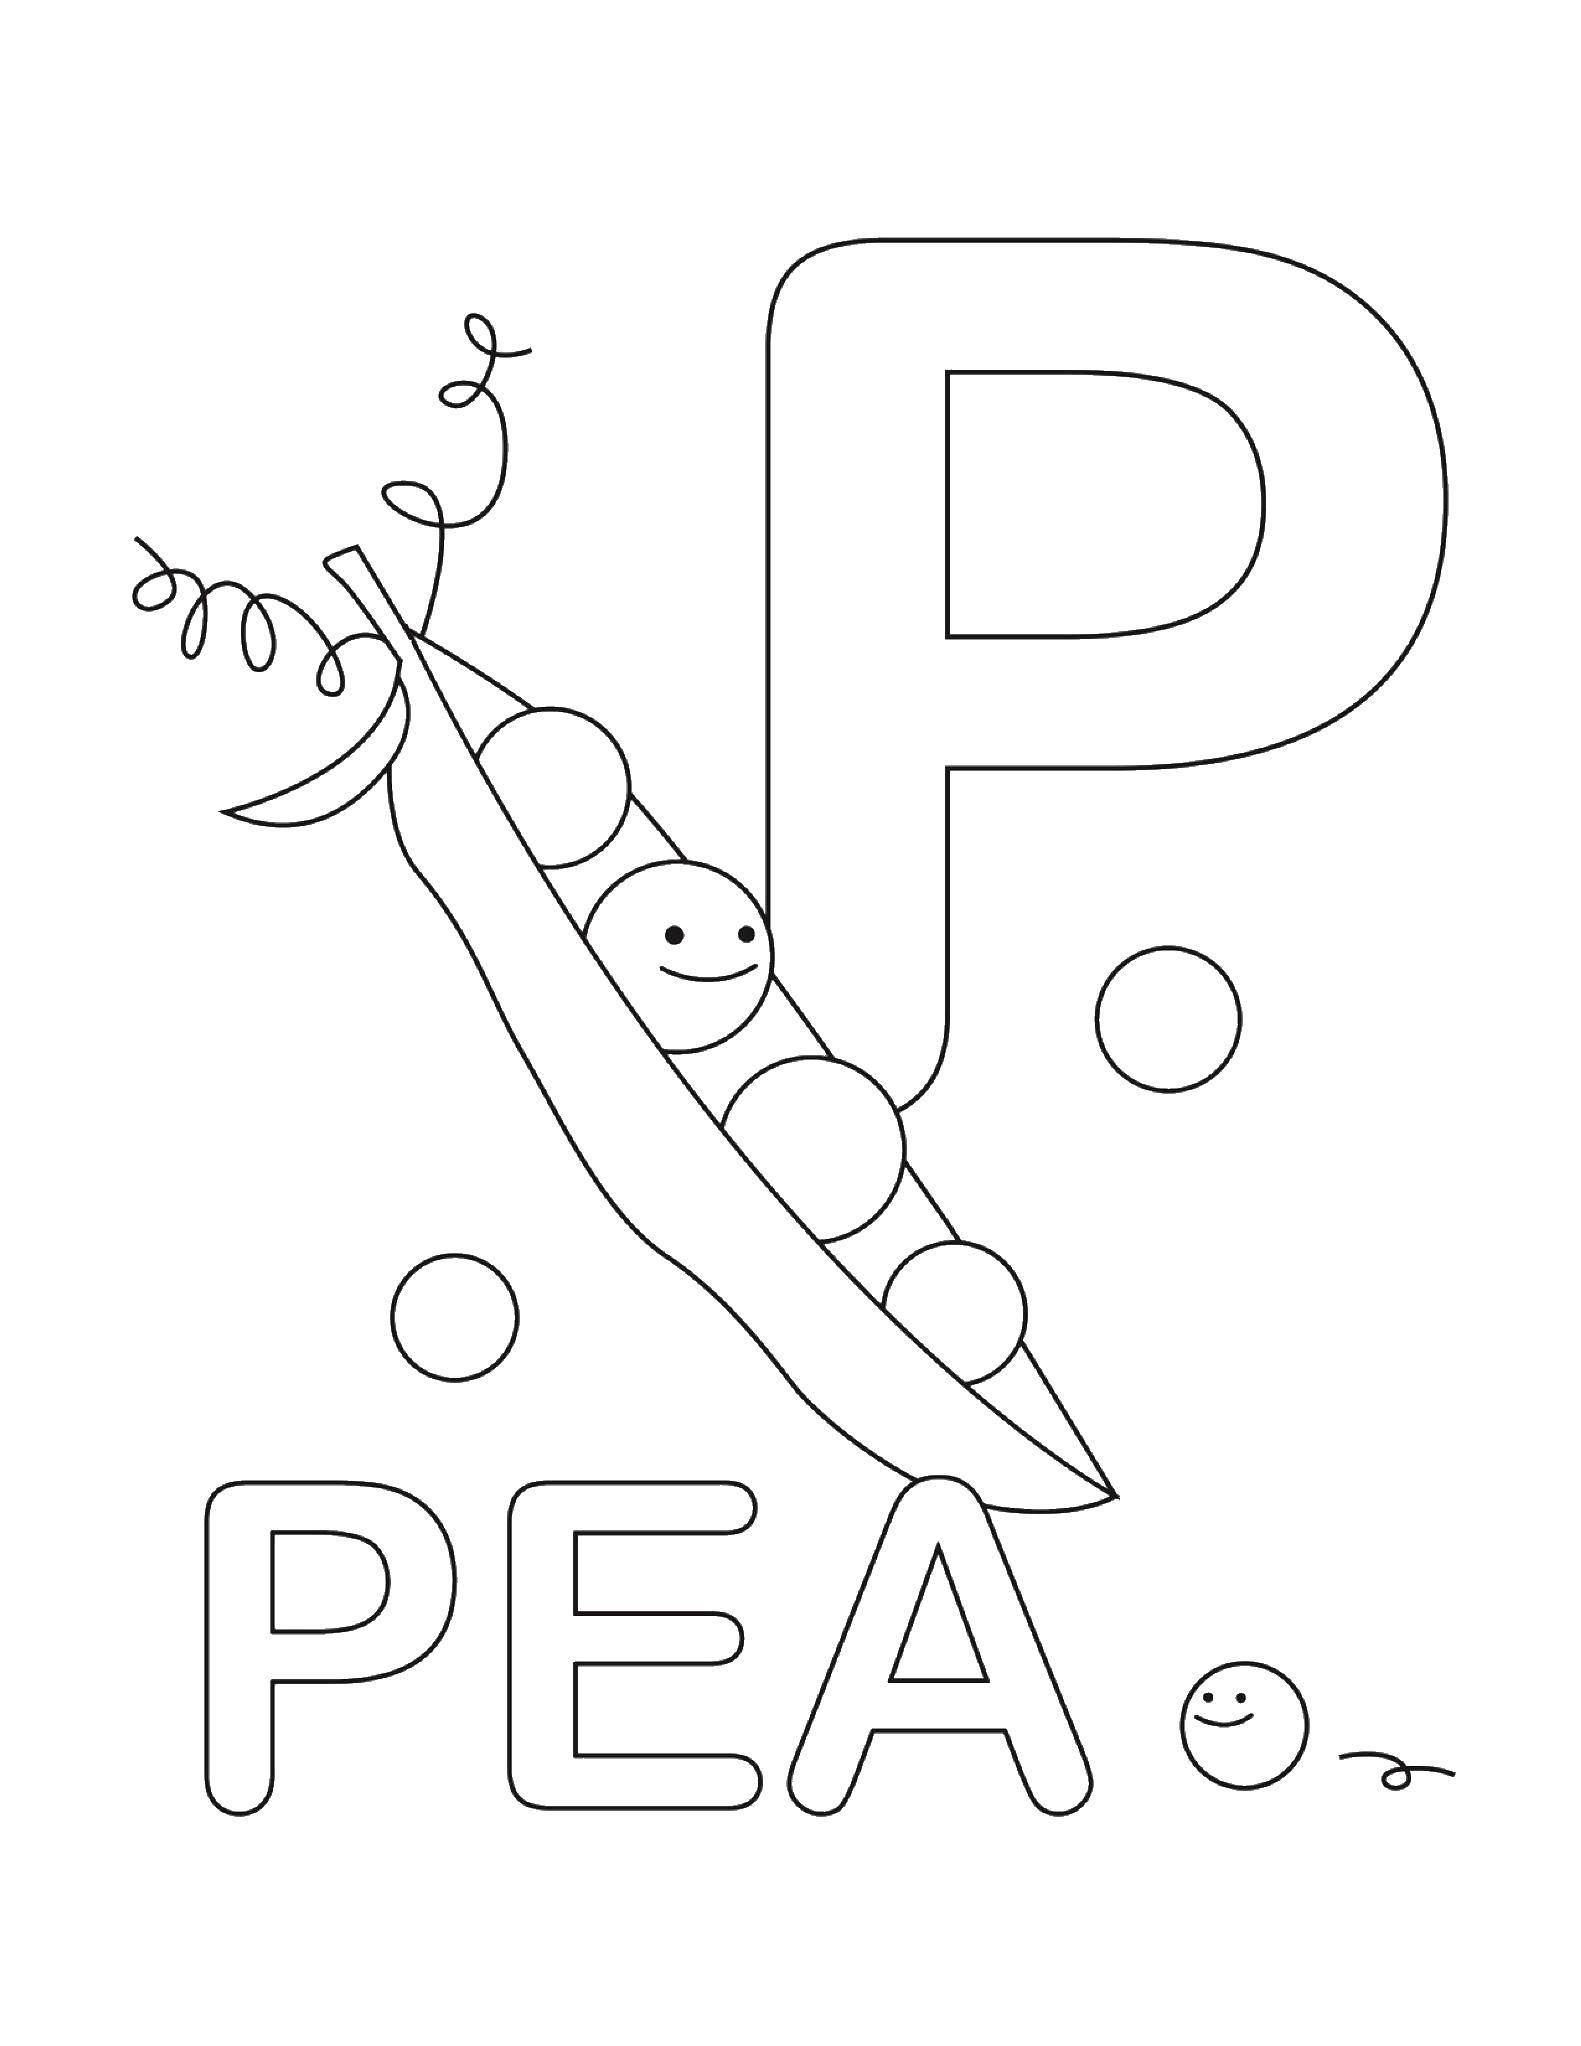 Coloring Peas. Category English words. Tags:  English words, peas.